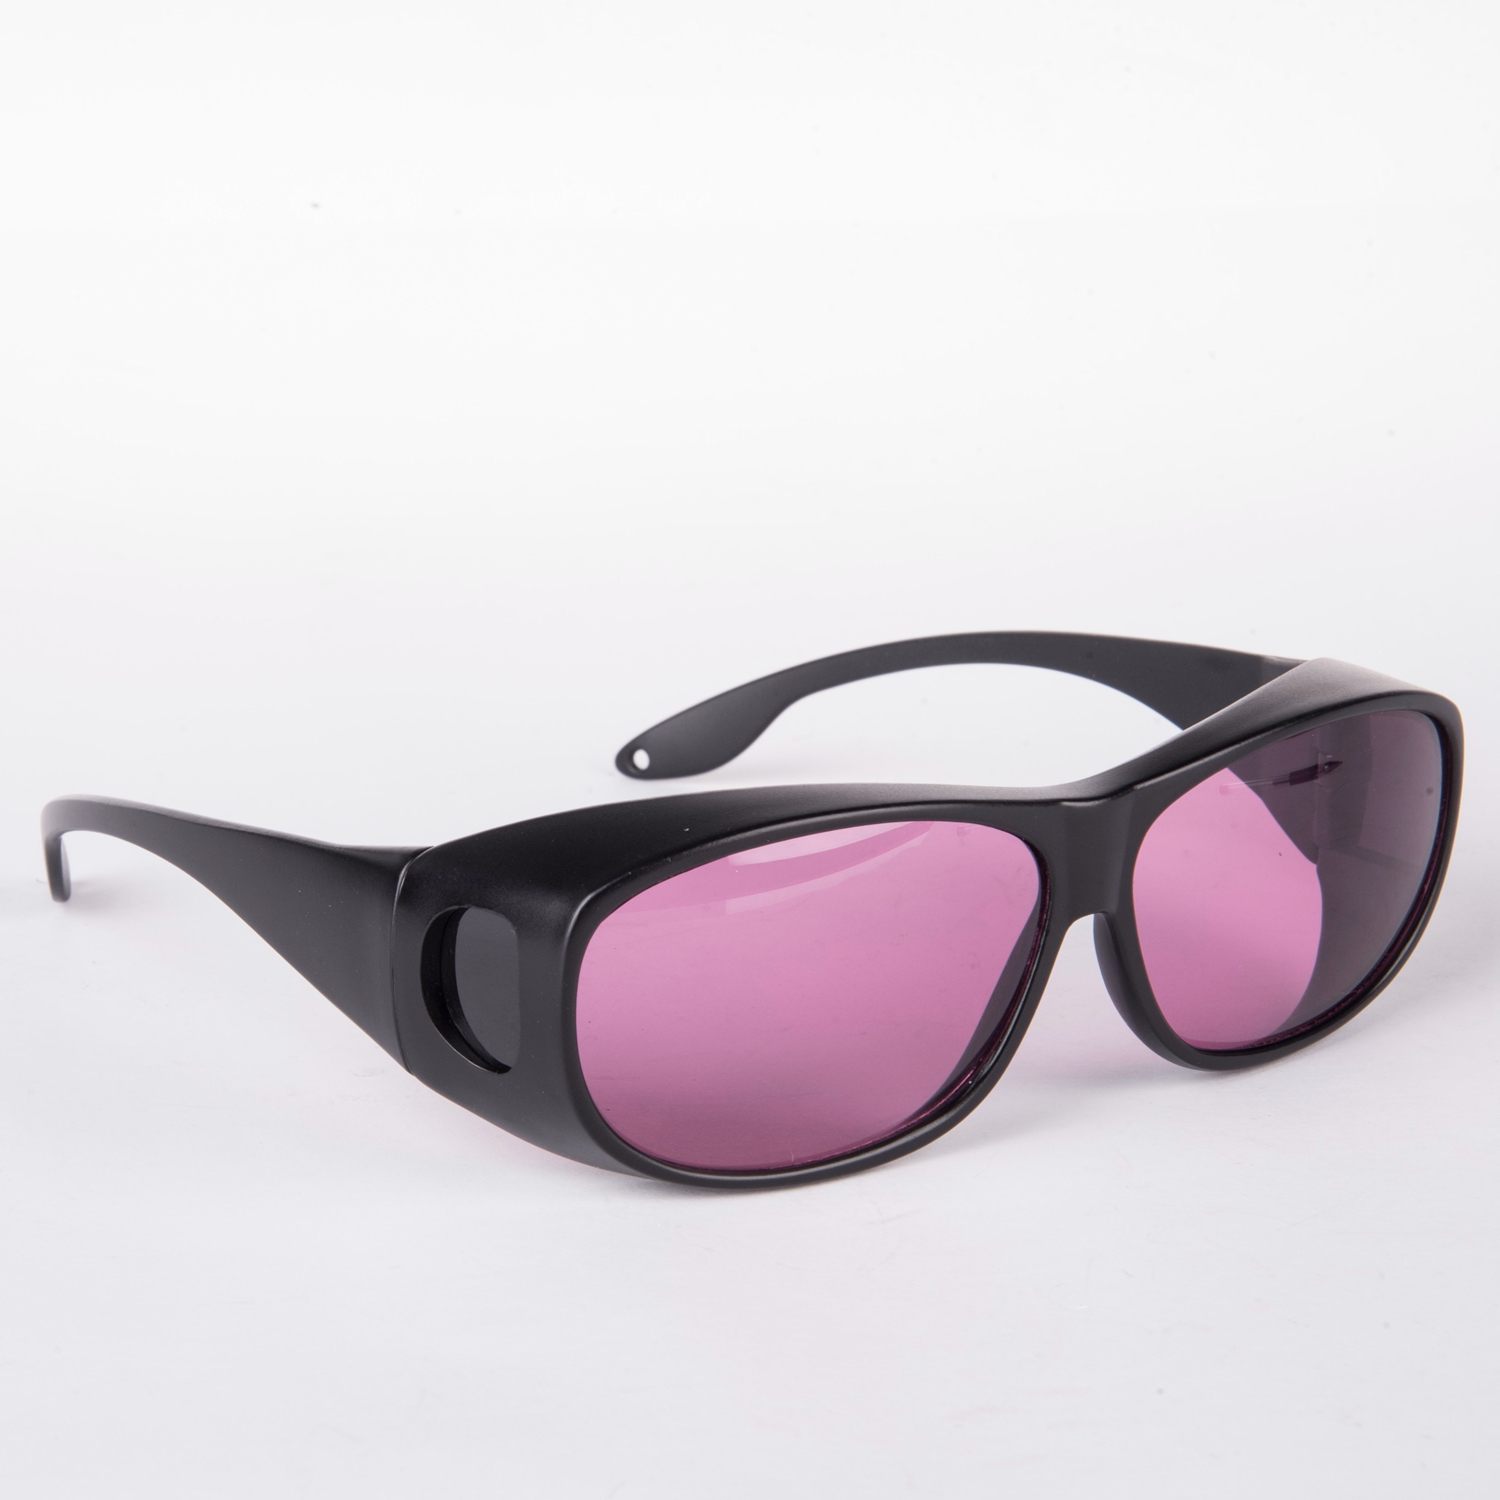 Laser safety glasses for UV & IR 190-380nm and 750-860nm